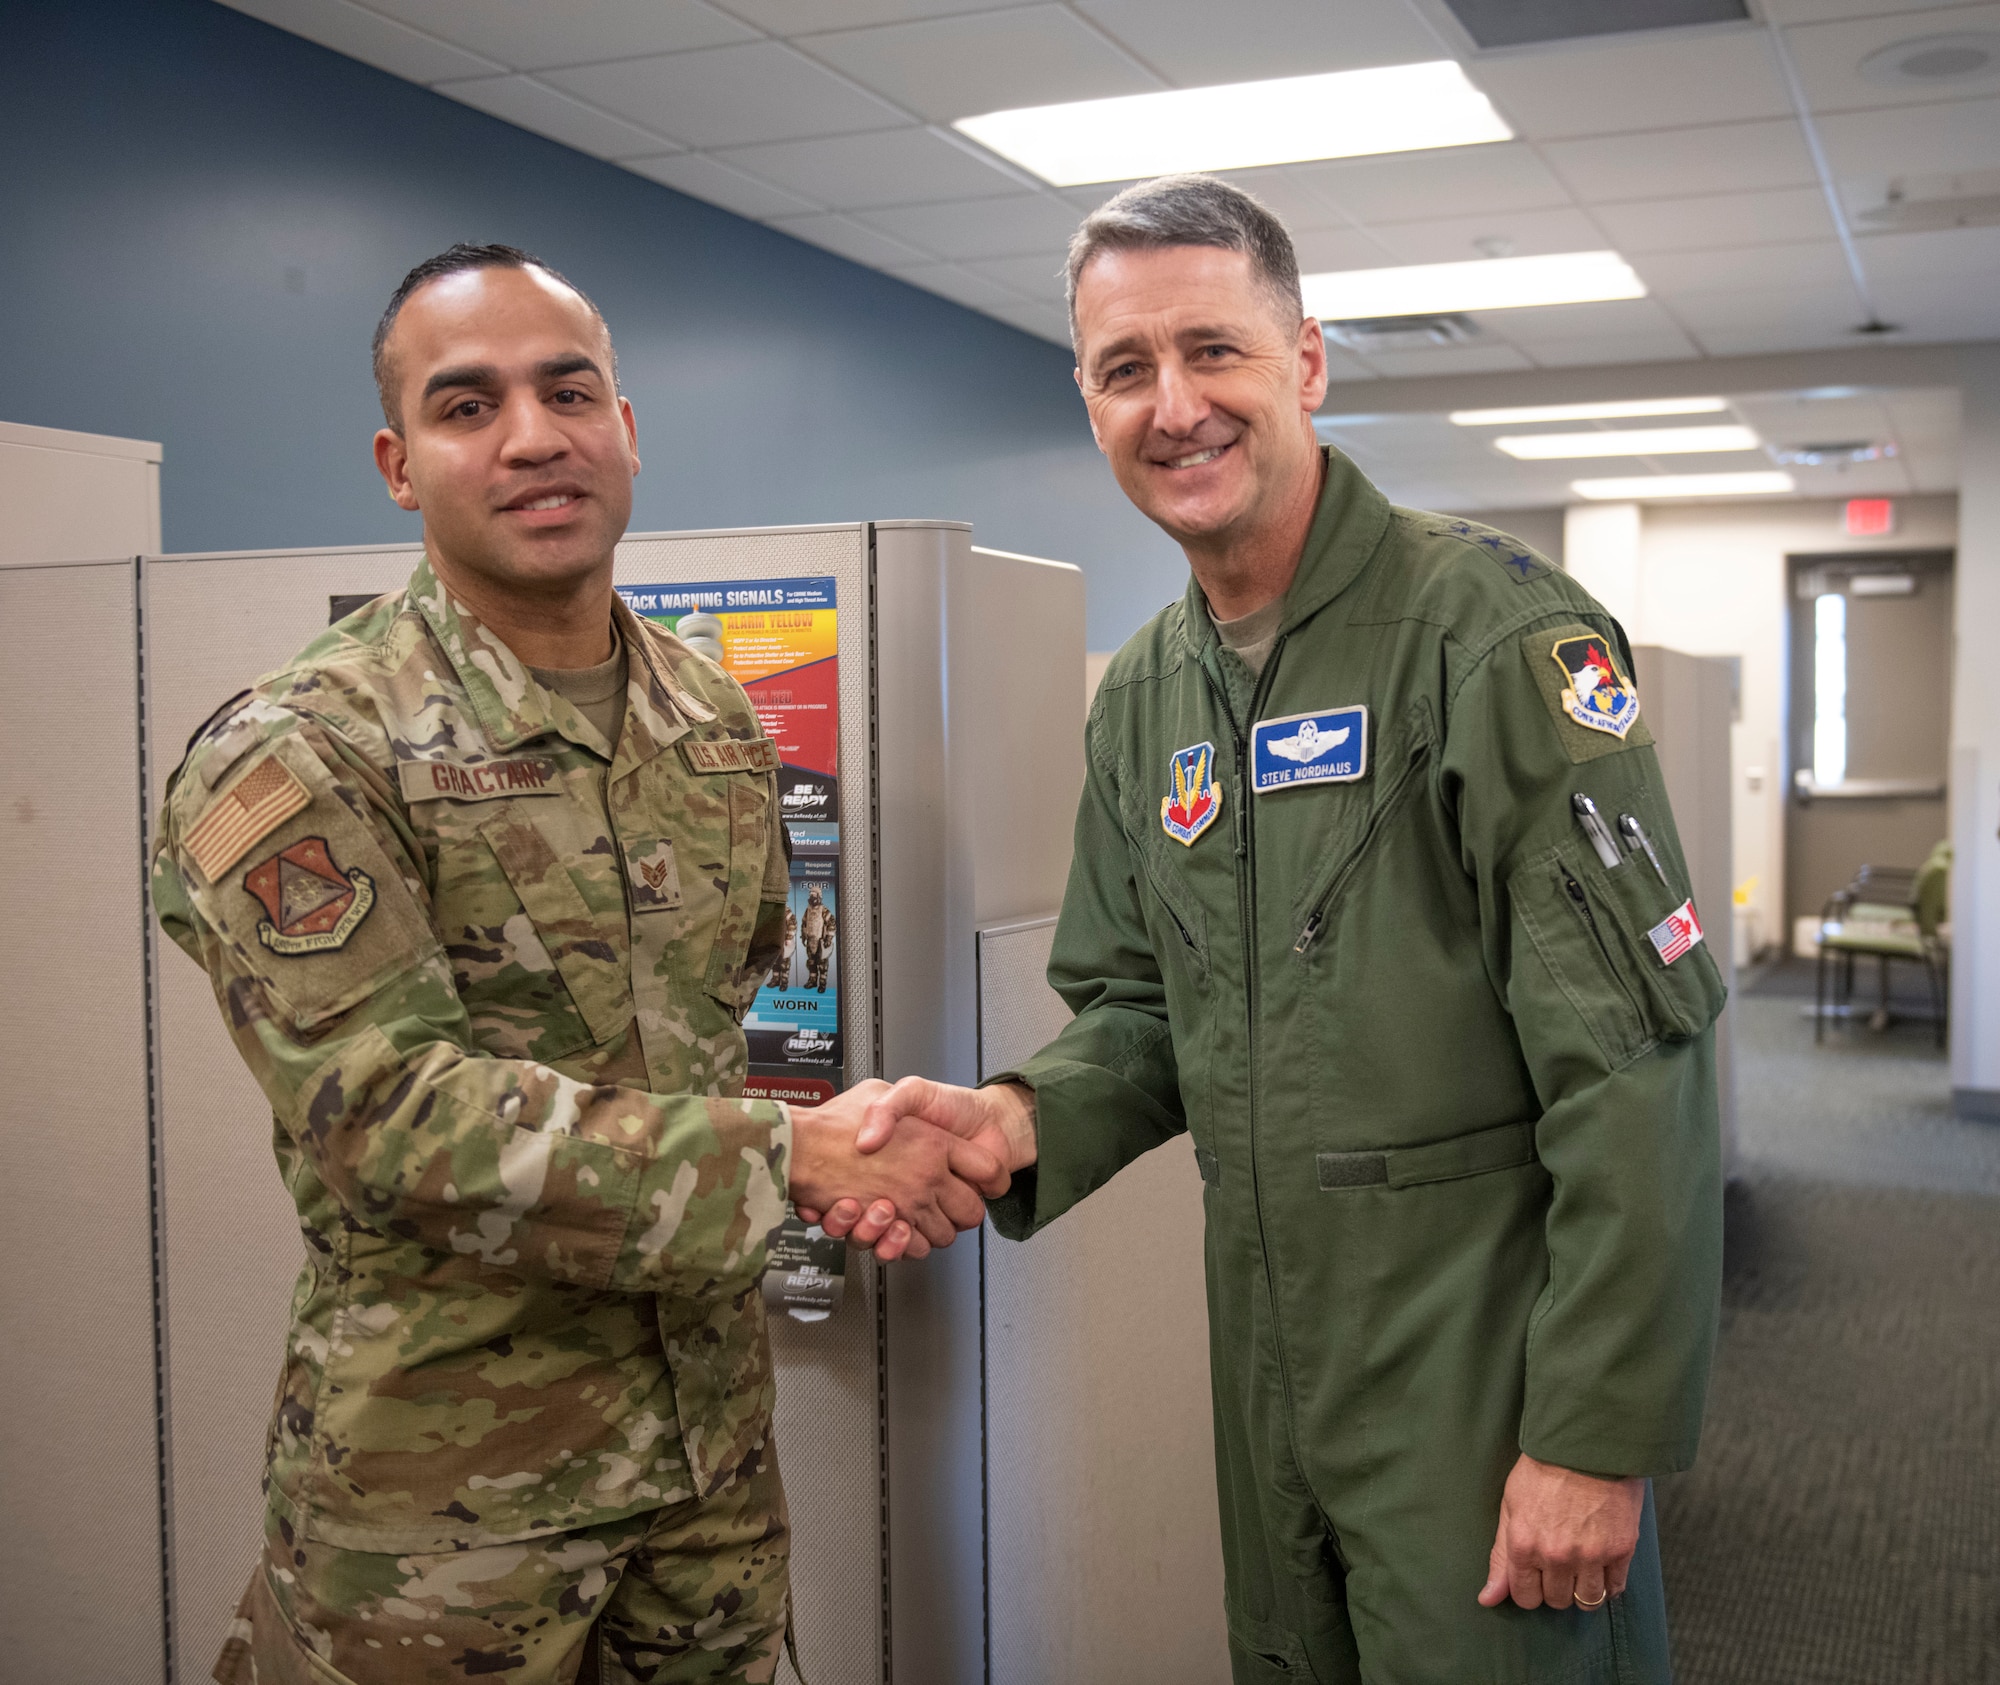 U.S. Air Force Lt. Gen. Steven S. Nordhaus, 1st Air Force commander, presents a challenge coin to U.S. Air Force Staff Sgt. Xavier Graciani, a security forces Airman assigned to the 180th Fighter Wing, after coining him, during a visit with the 180FW, in Swanton, Ohio, Feb. 1, 2024. Graciani was coined for his exemplary performance, maintaining the highest levels of proficiency and readiness. (U.S. Air National Guard photo by Airman 1st Class Nicholas Battani)